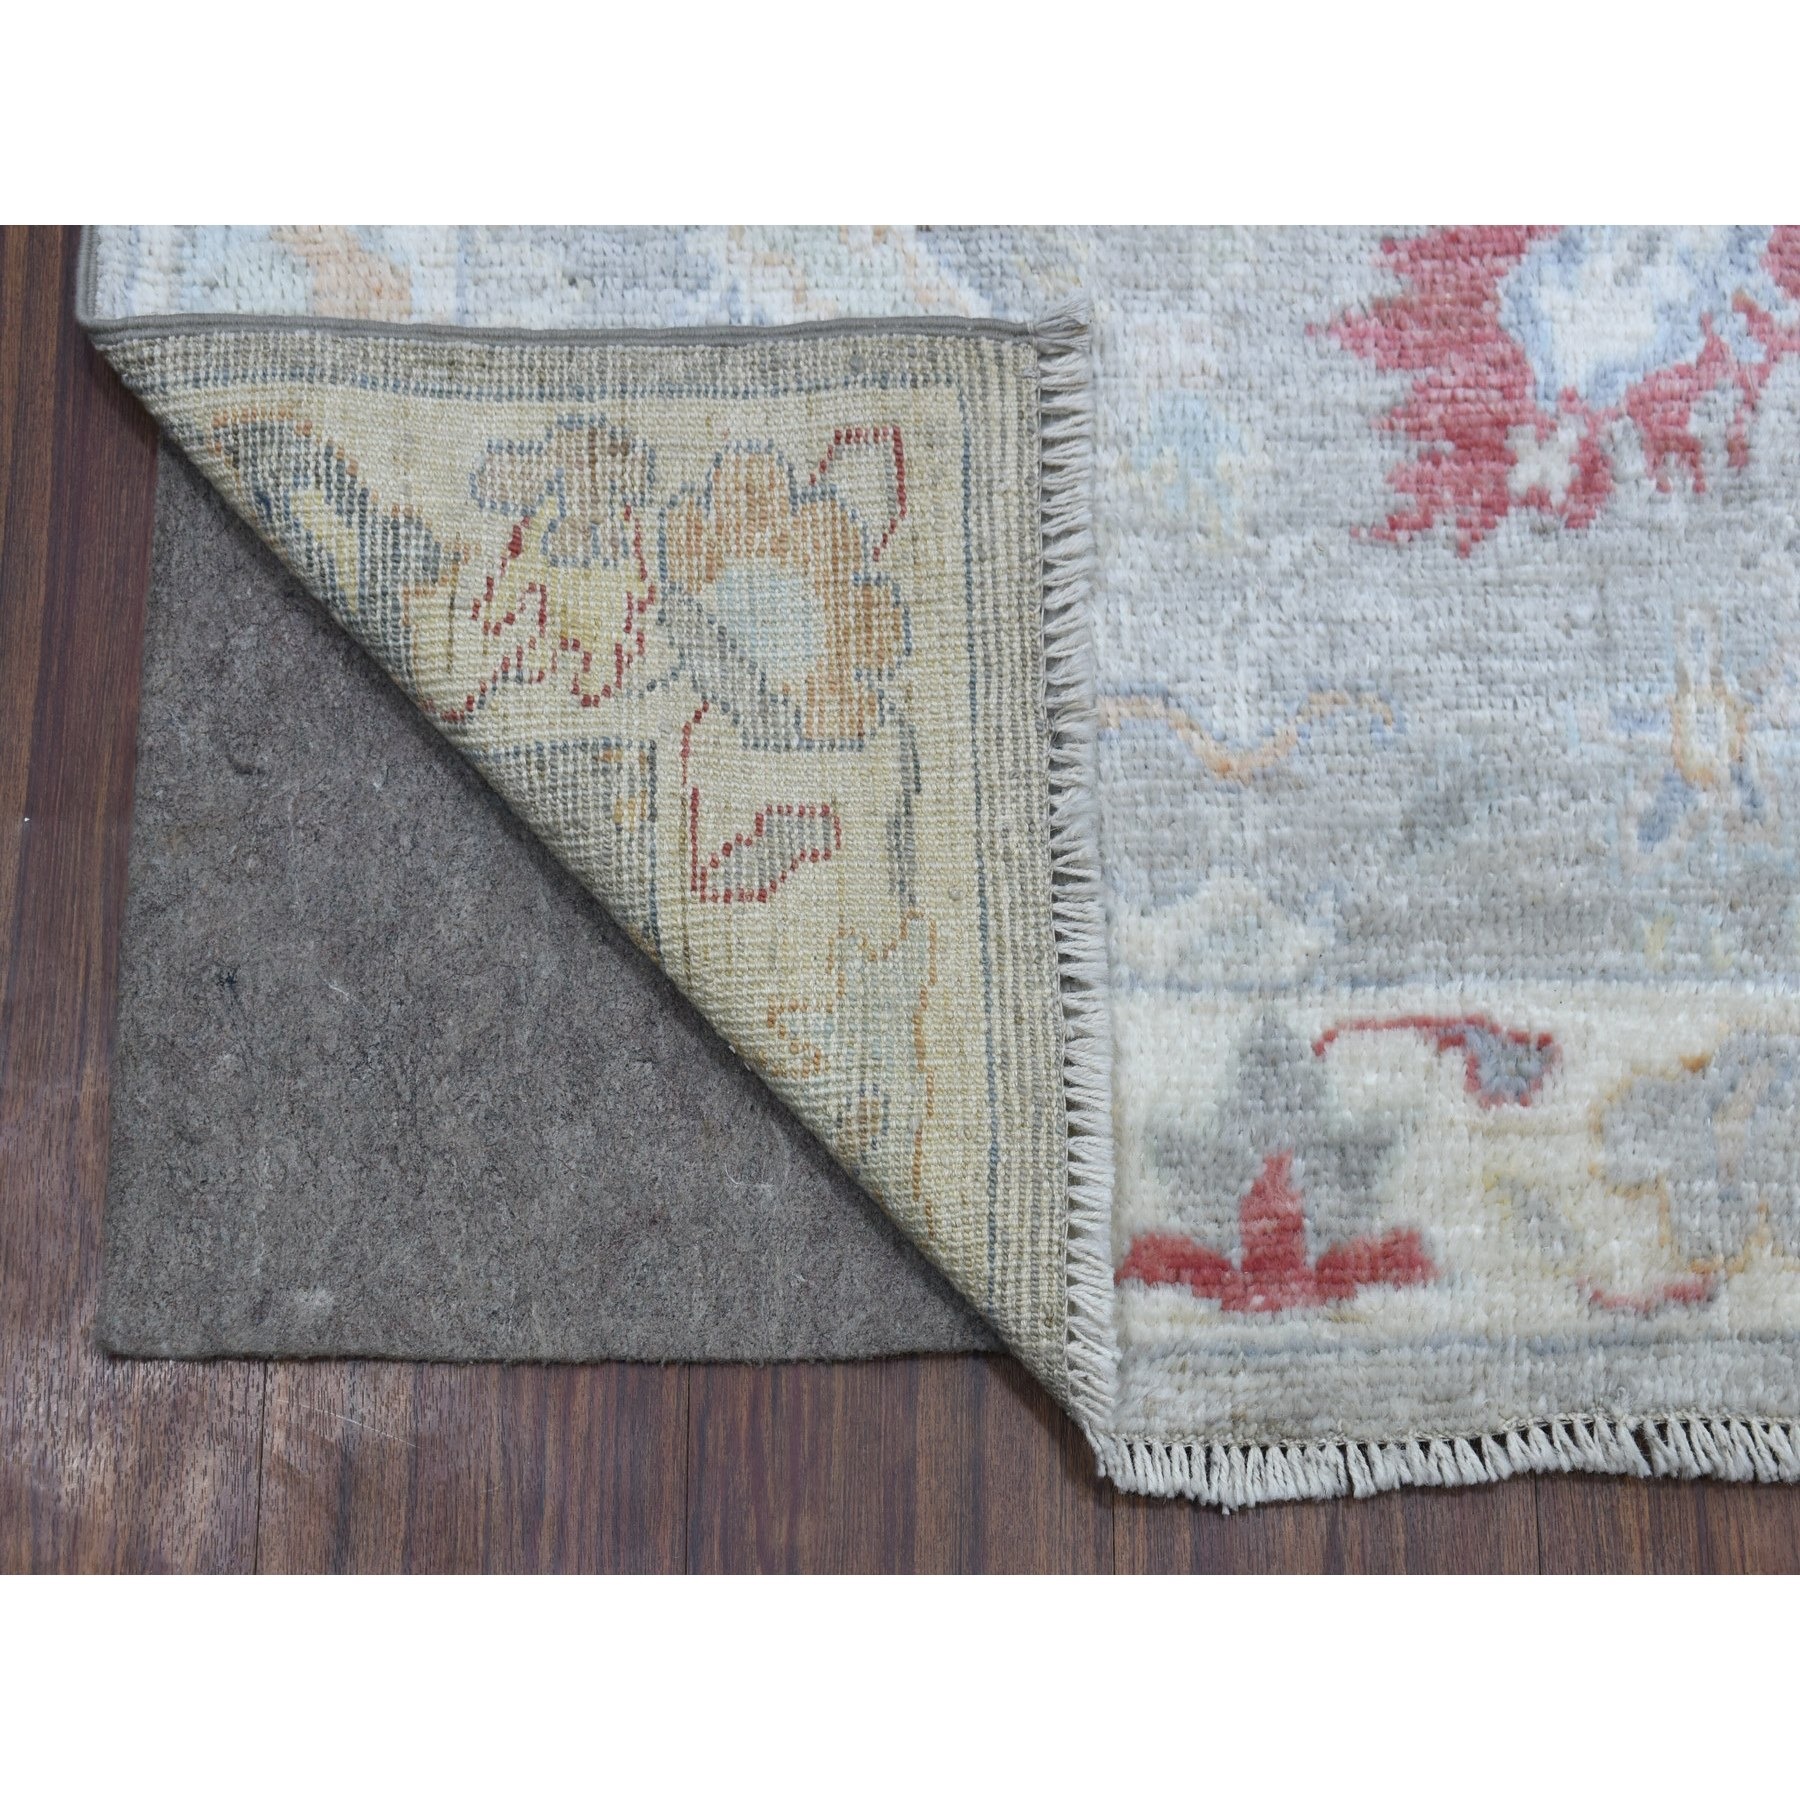 3'x16'1" Hand Woven Extremely Durable Shiny Wool Gray Angora Oushak with All Over Design XL Runner Oriental Rug 